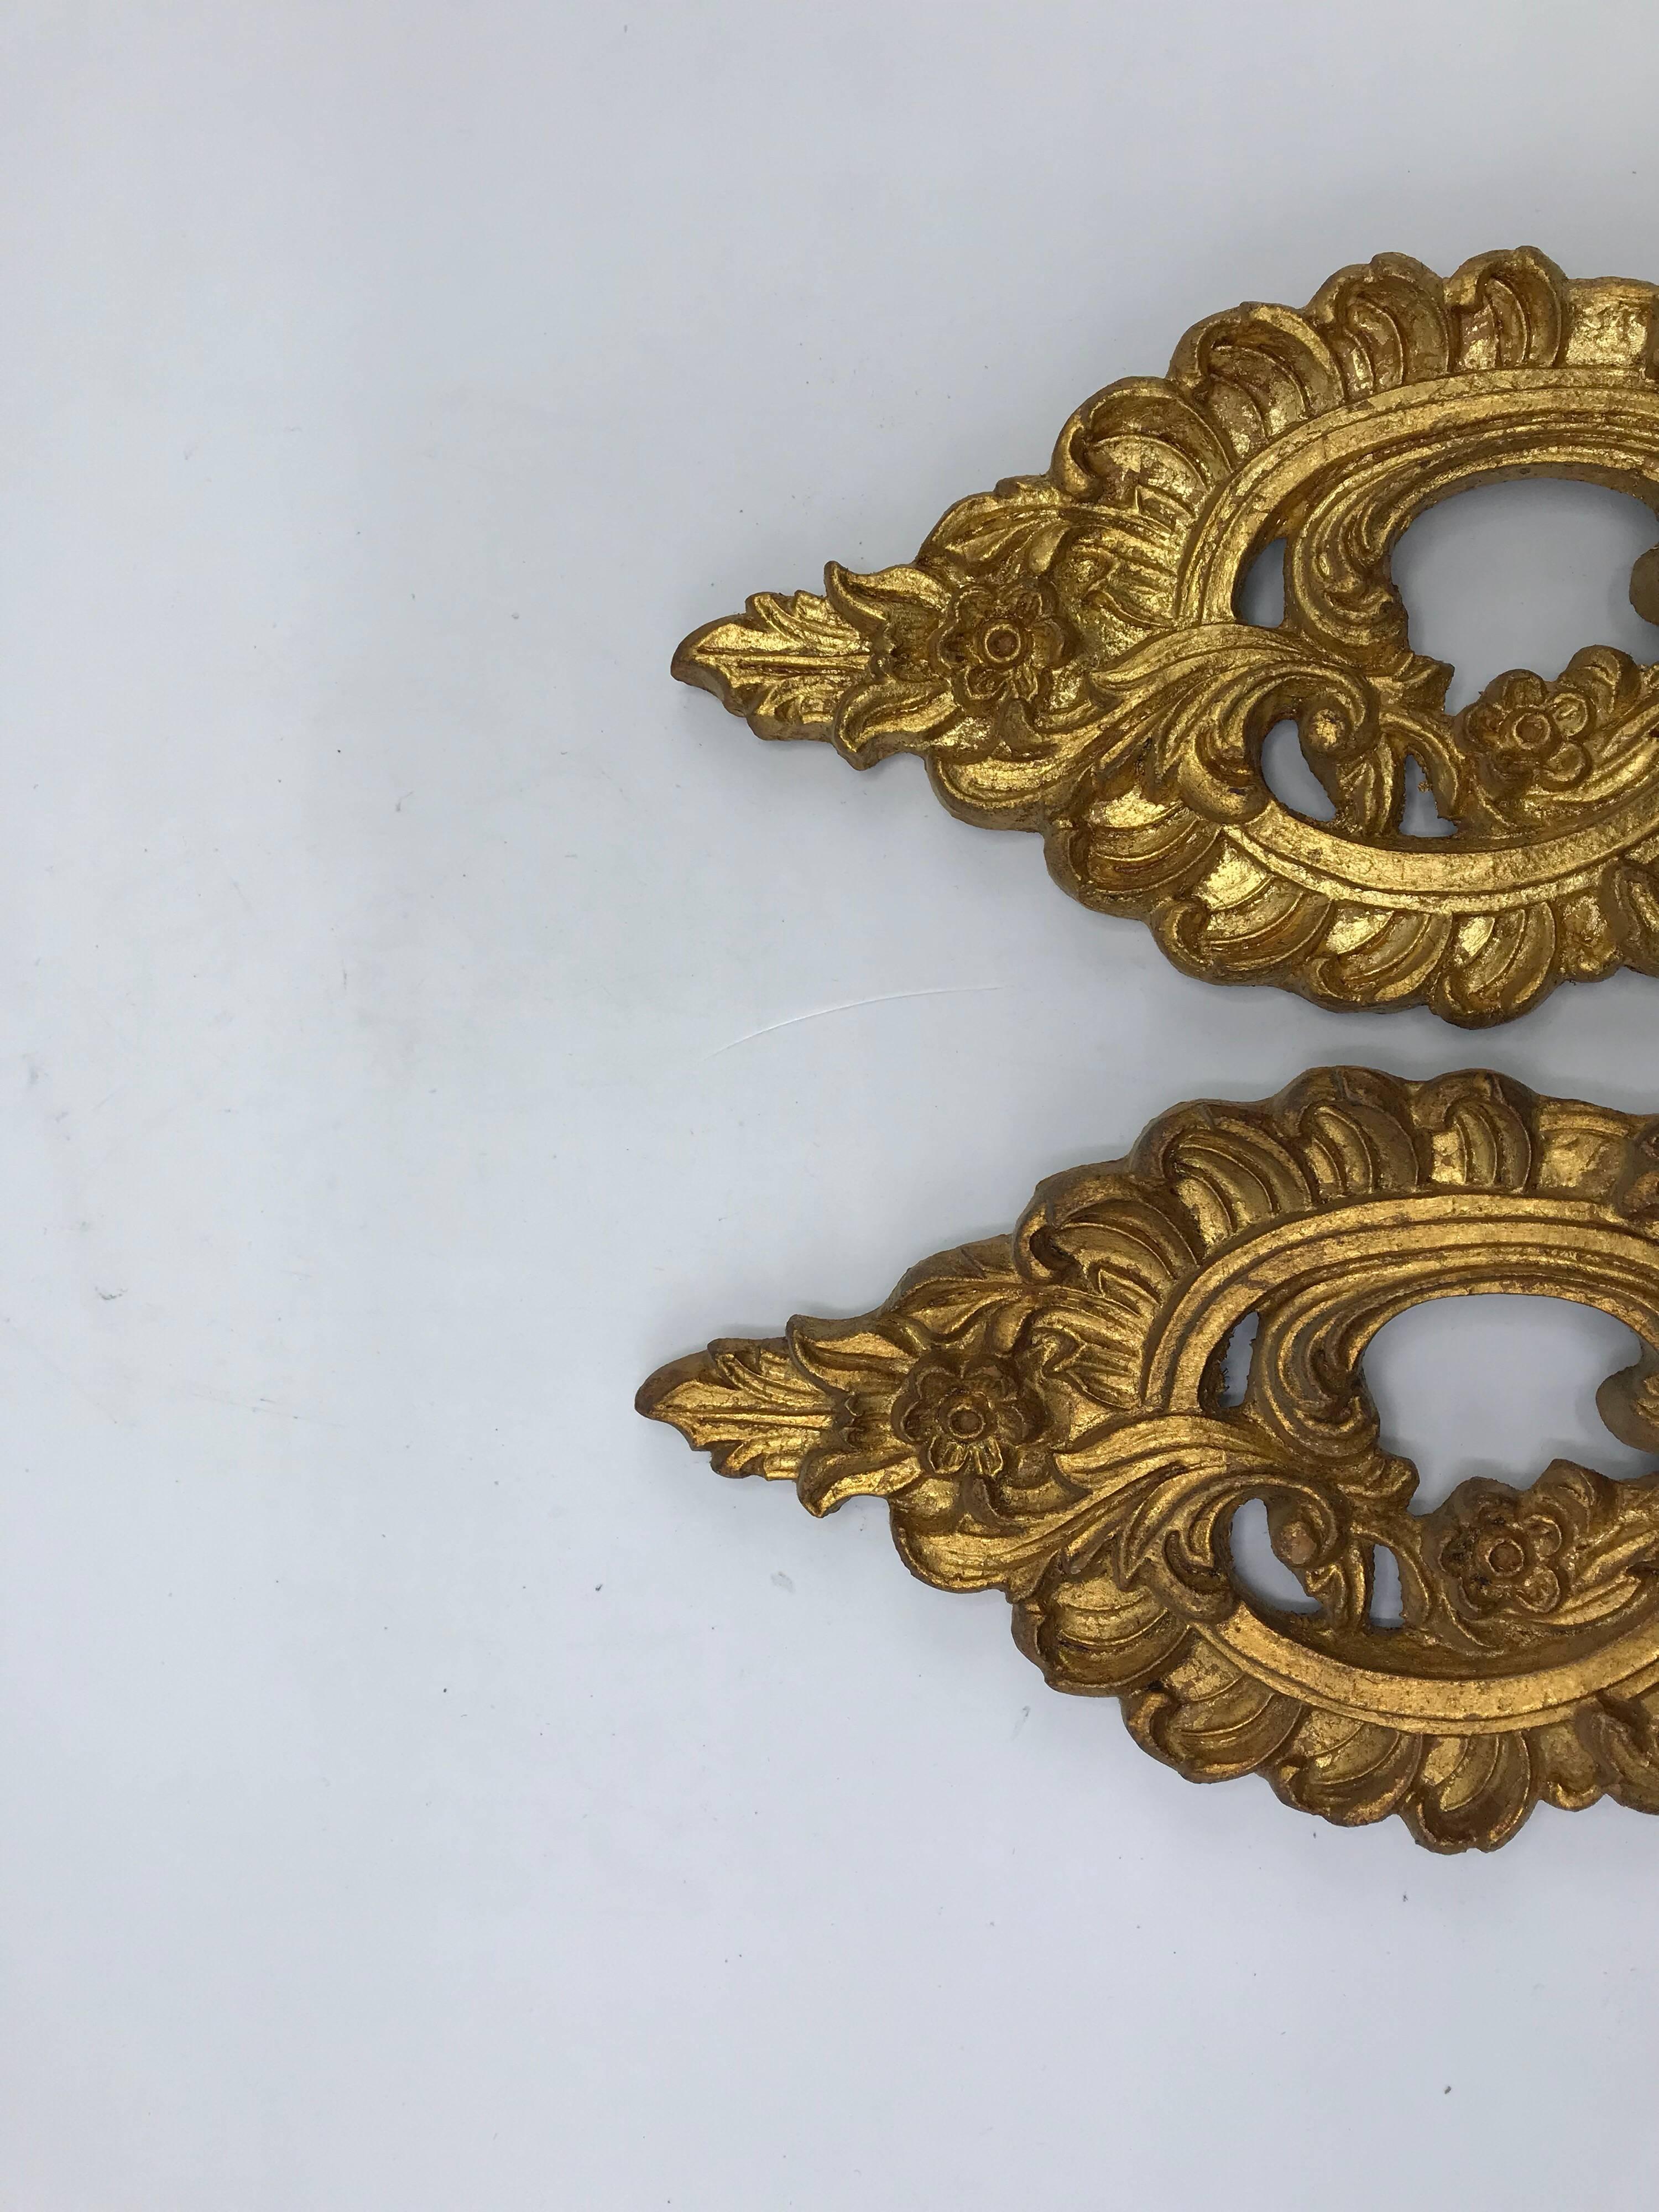 Listed is a beautiful, pair of 1960s Italian Florentine gilded candlestick wall sconces. Wood is in excellent condition. The candlestick drip plates are mismatched, but not noticeable. Can easily be replaced by buyer.